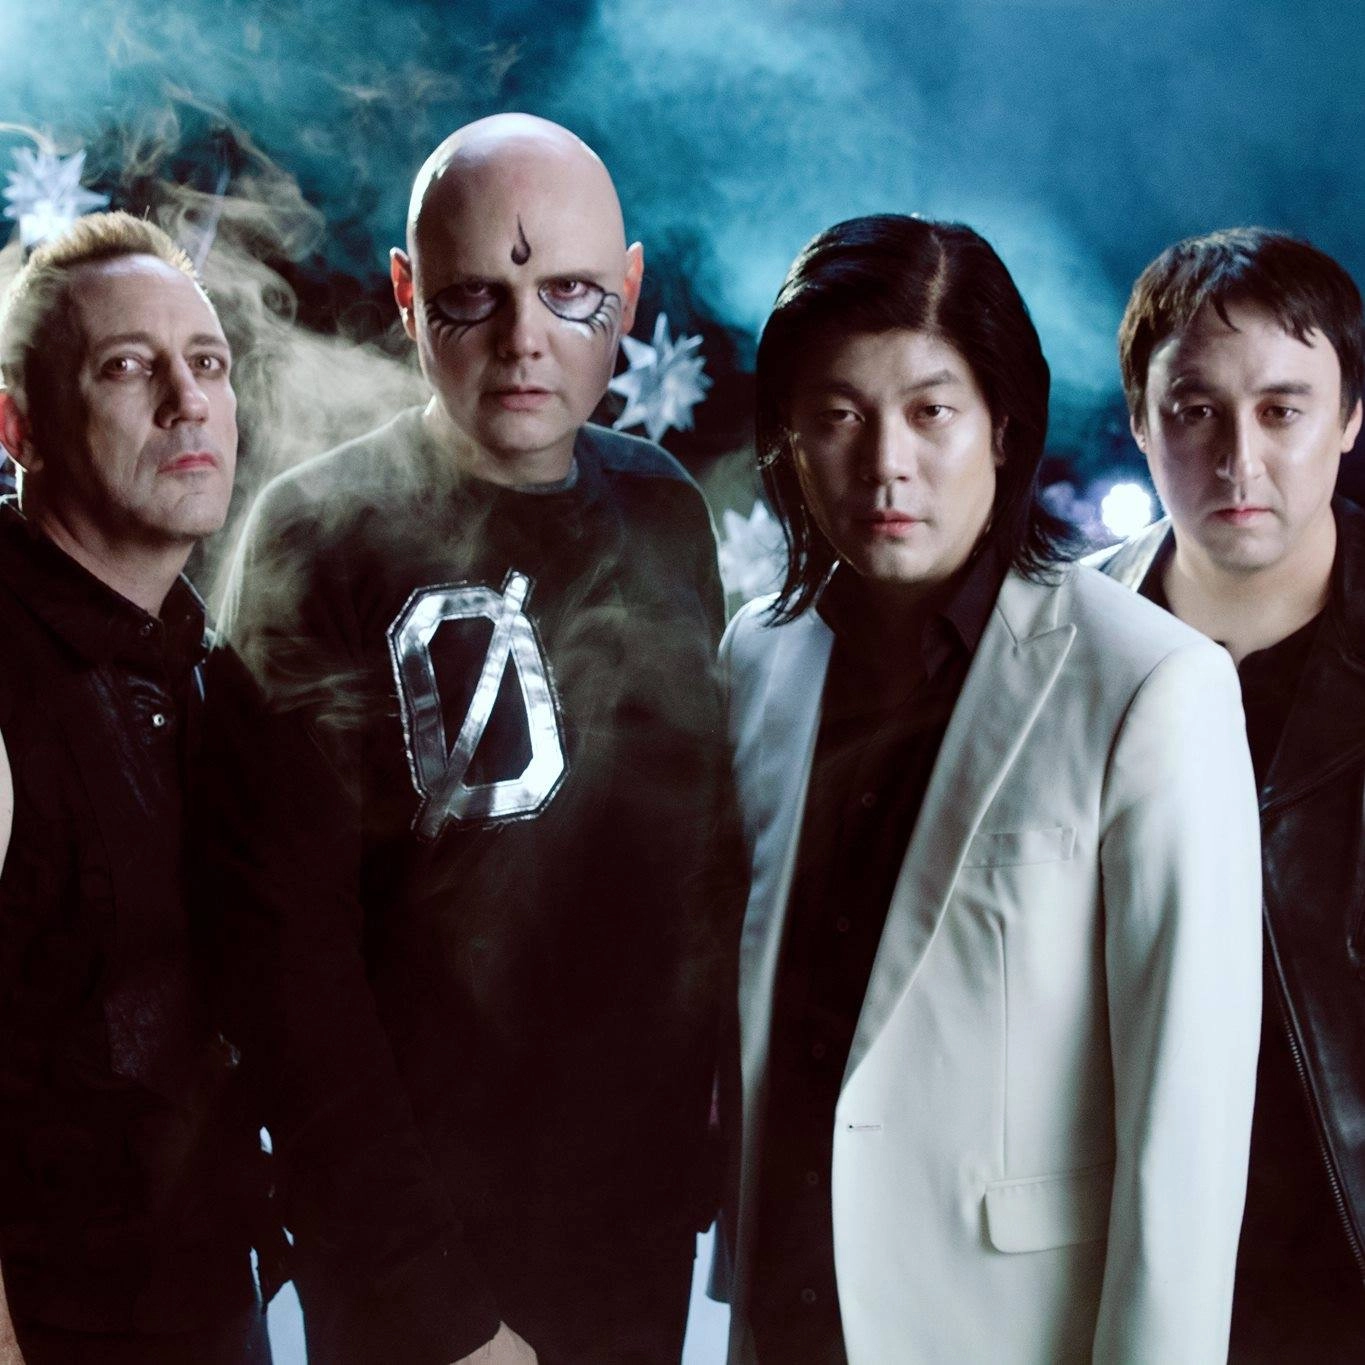 The Smashing Pumpkins - The World Is A Vampire 2024 in der Arena Gliwice Tickets